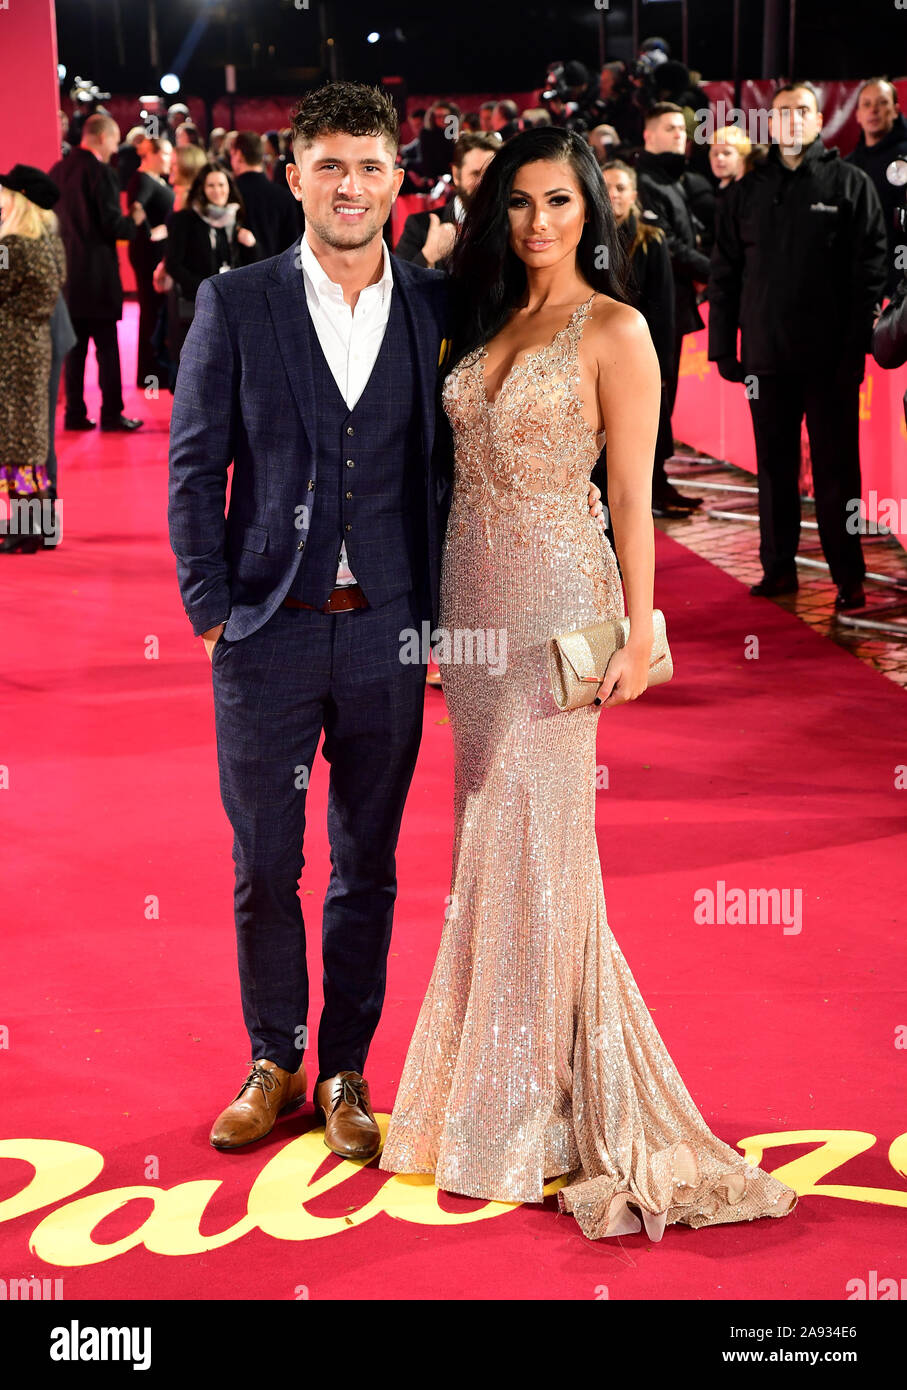 Jordan Davies and Isobel Mills arriving for the ITV Palooza held at the  Royal Festival Hall, Southbank Centre, London Stock Photo - Alamy